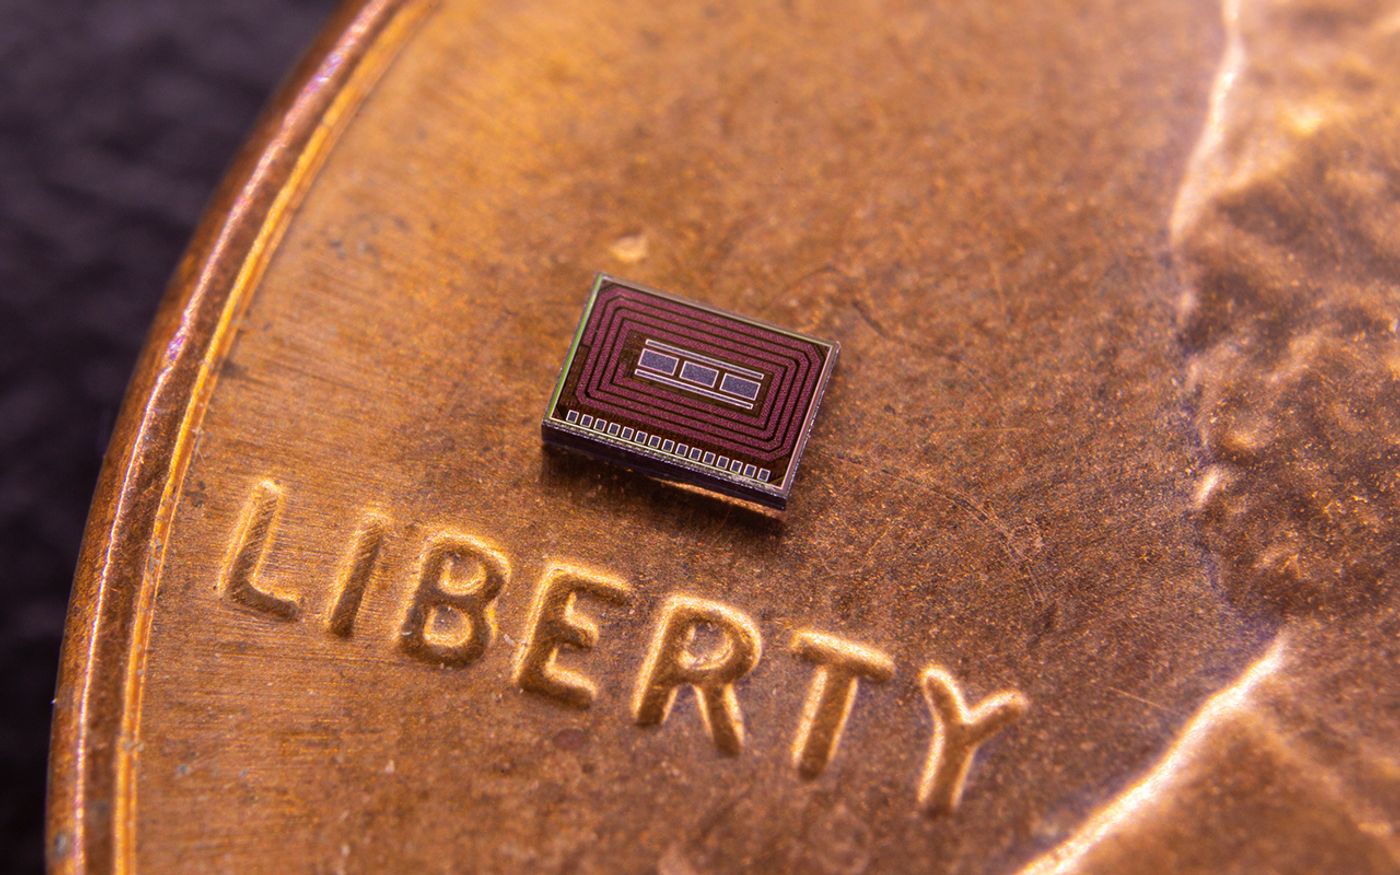 chip size in comparison to a penny, credit: David Baillot/UC San Diego Jacobs School of Engineering